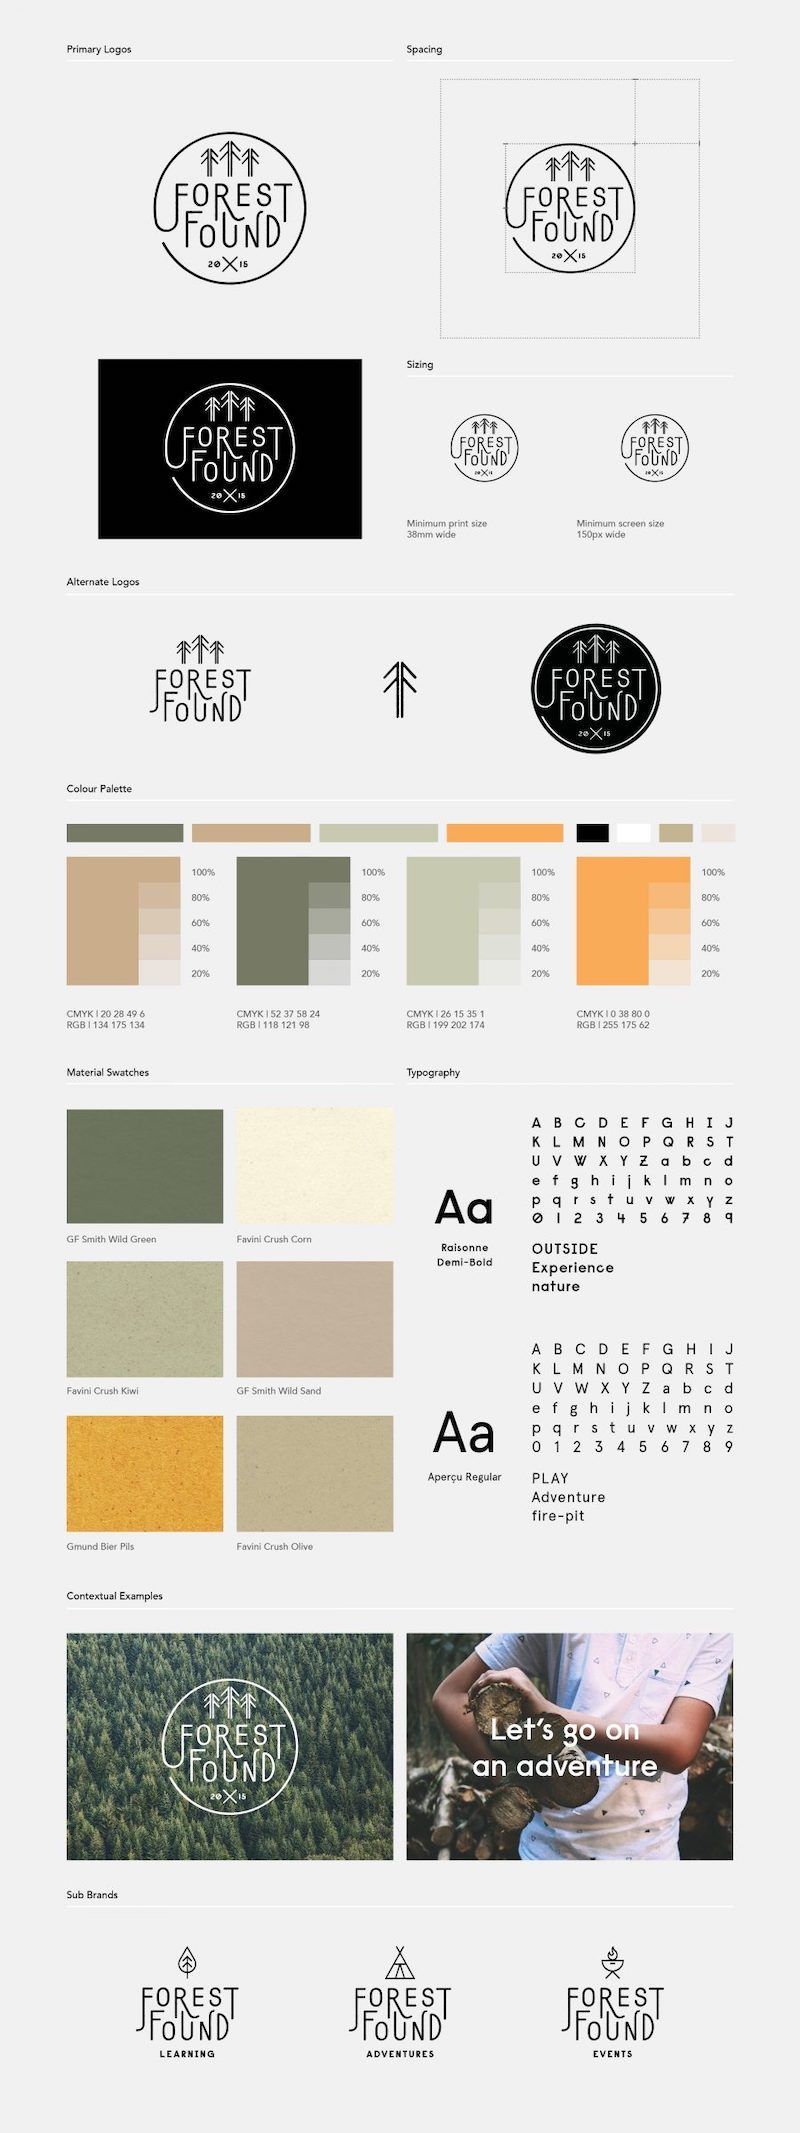 19 brand guidelines style Guides ideas